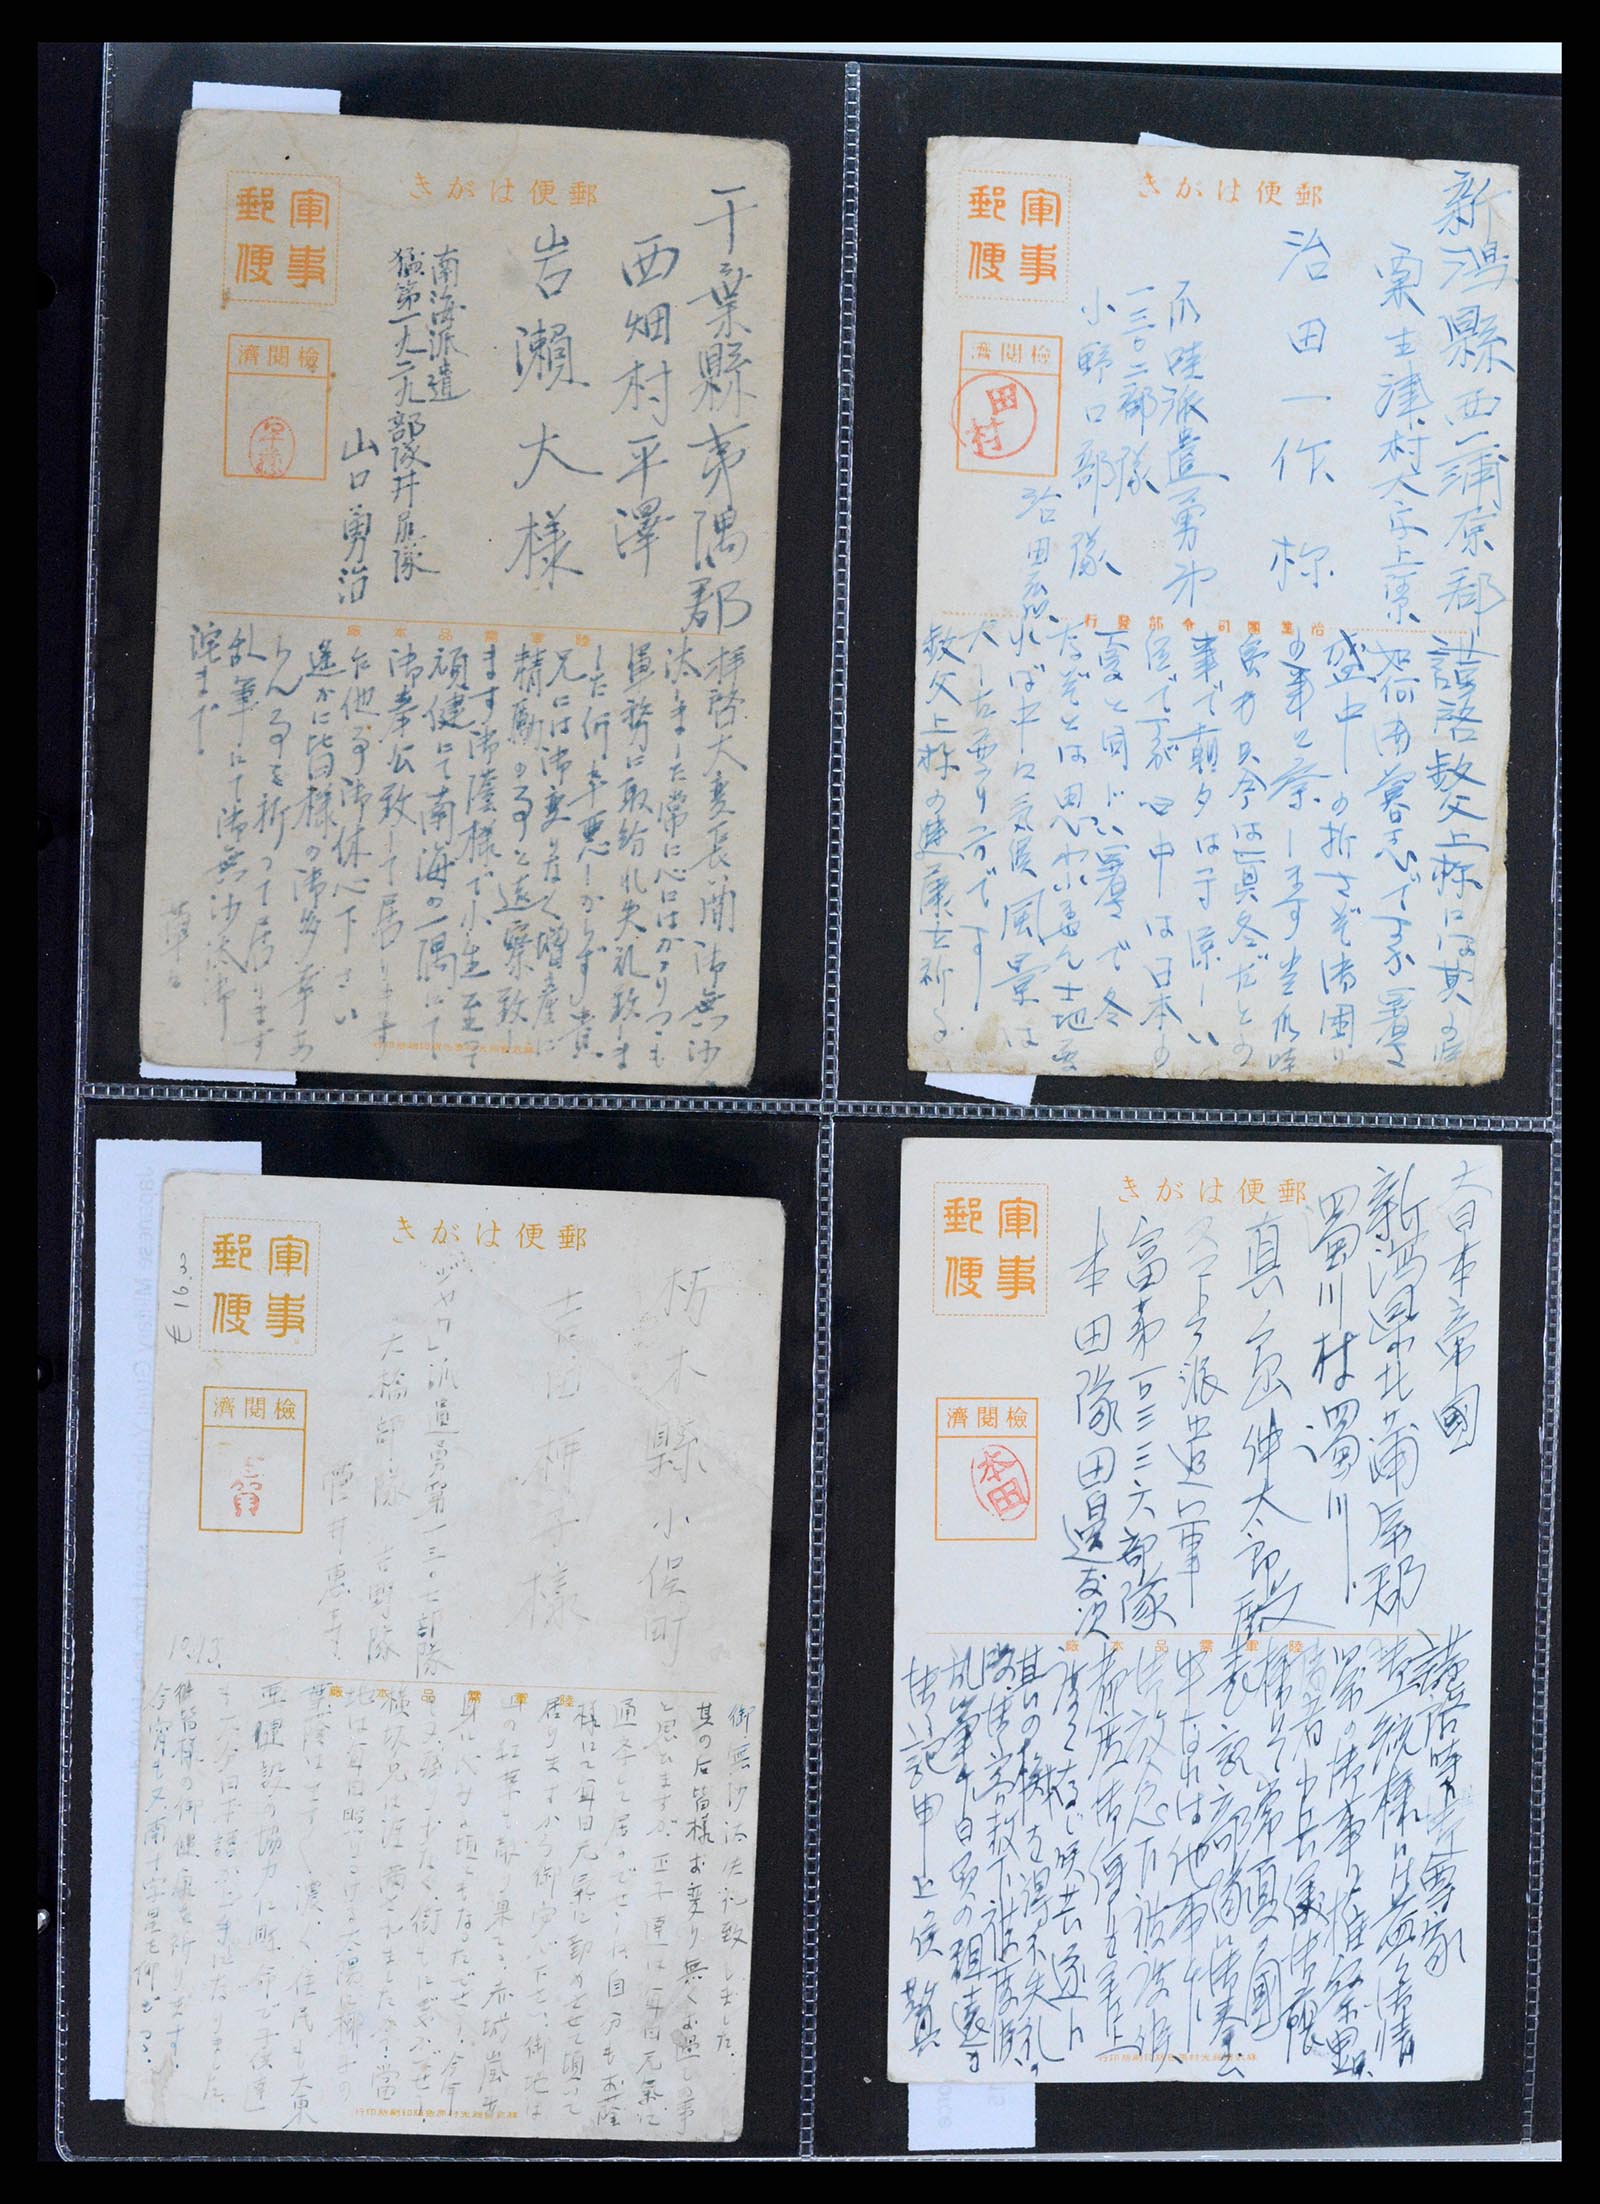 37423 015 - Stamp collection 37423 Dutch Indies Japanese occupation covers 1942-1945